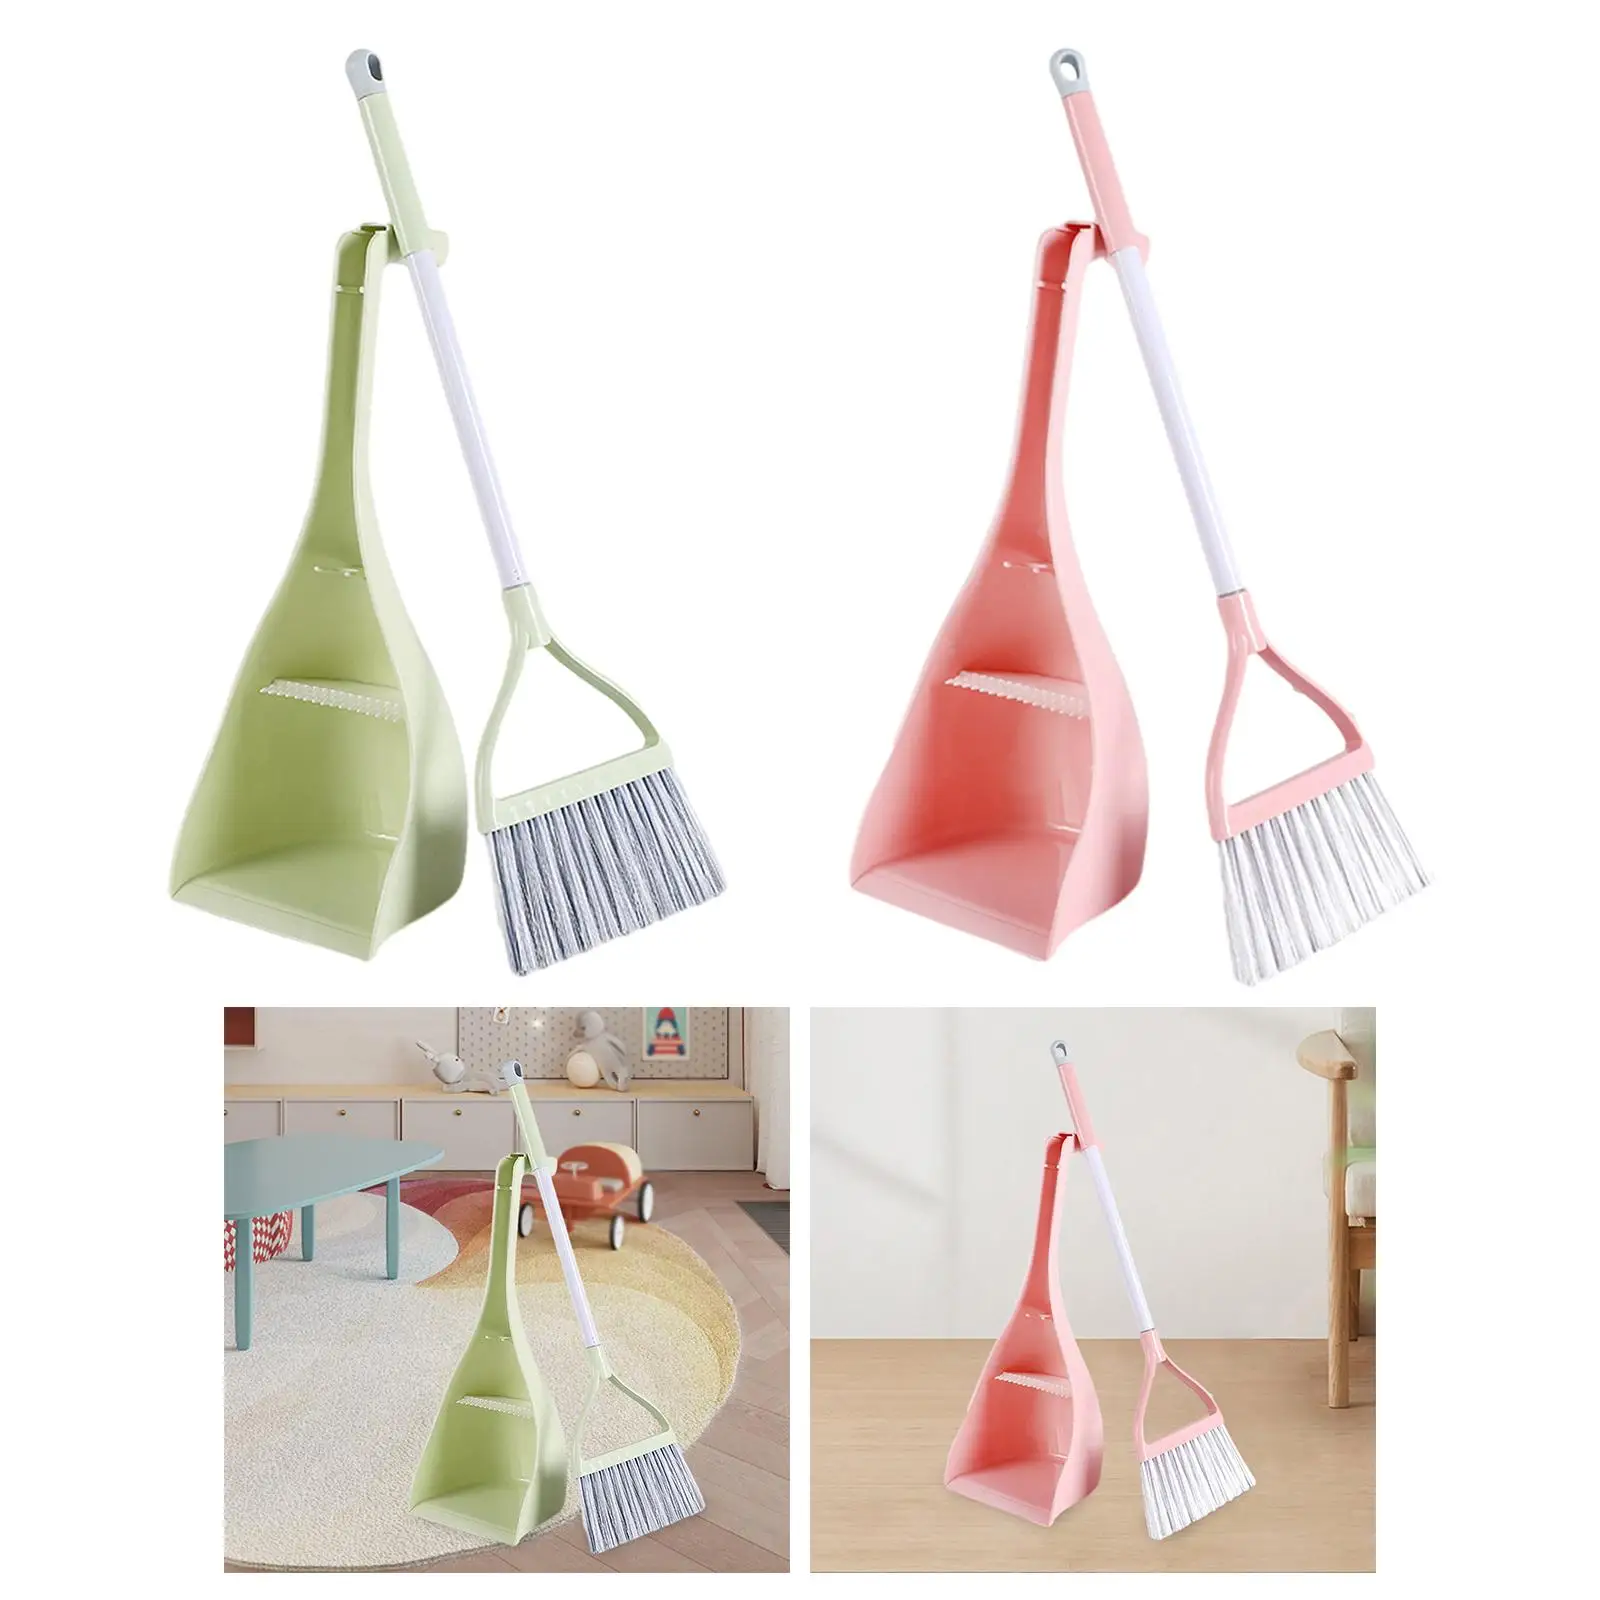 

Miniature Sweeping House Tool Toy Set Role Playing Holiday Gift Kids Broom Set for Ages 1 23 4 5 Preschool Kindergarten